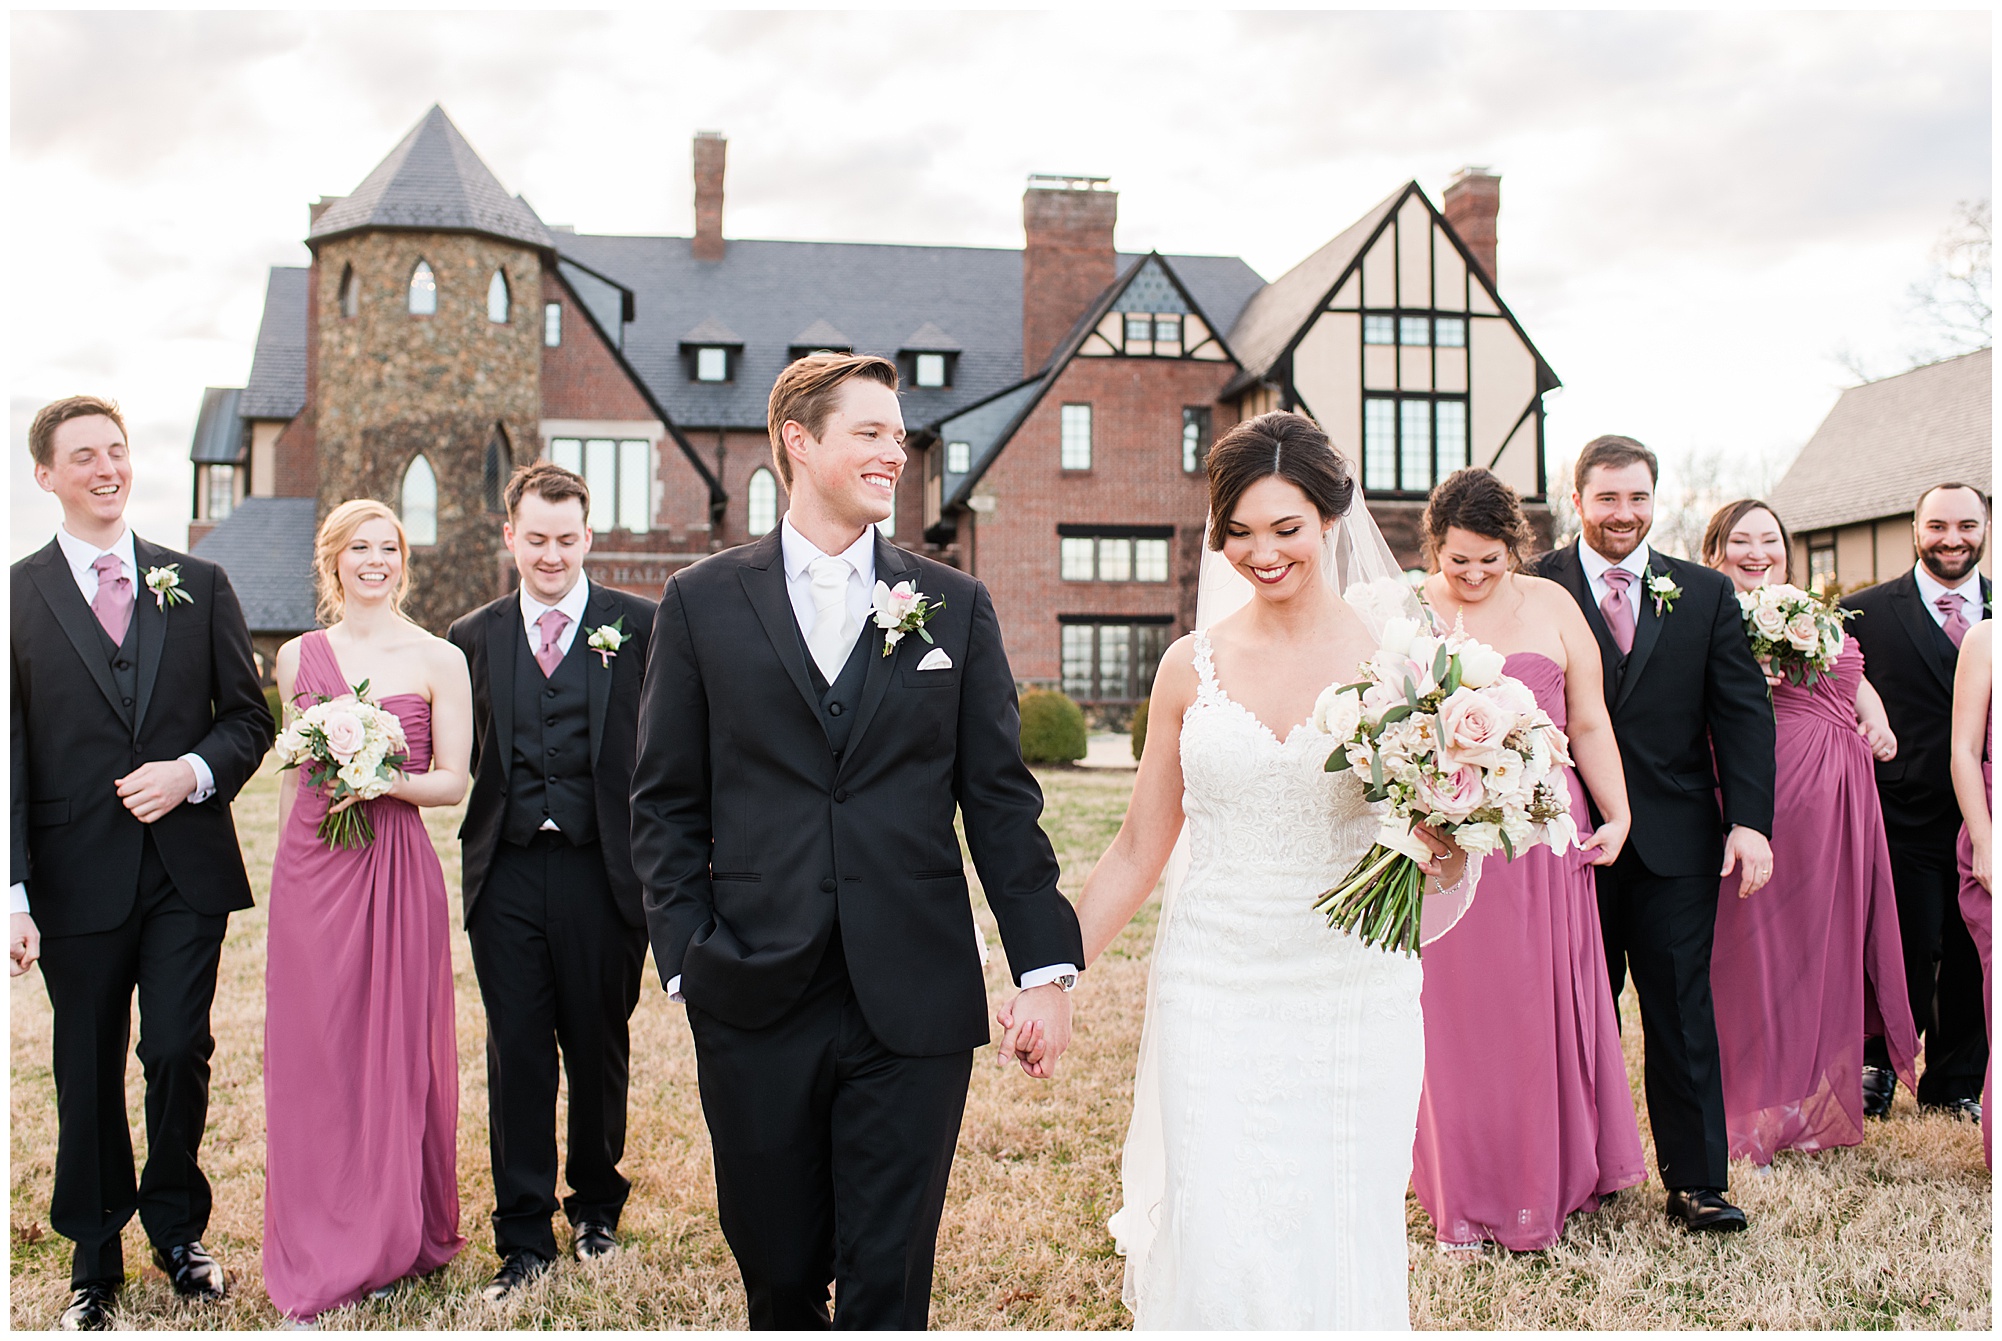 bride and groom formal portraits with wedding party at dover hall estate. by sarah & dave photographer, richmond rva wedding photographer.